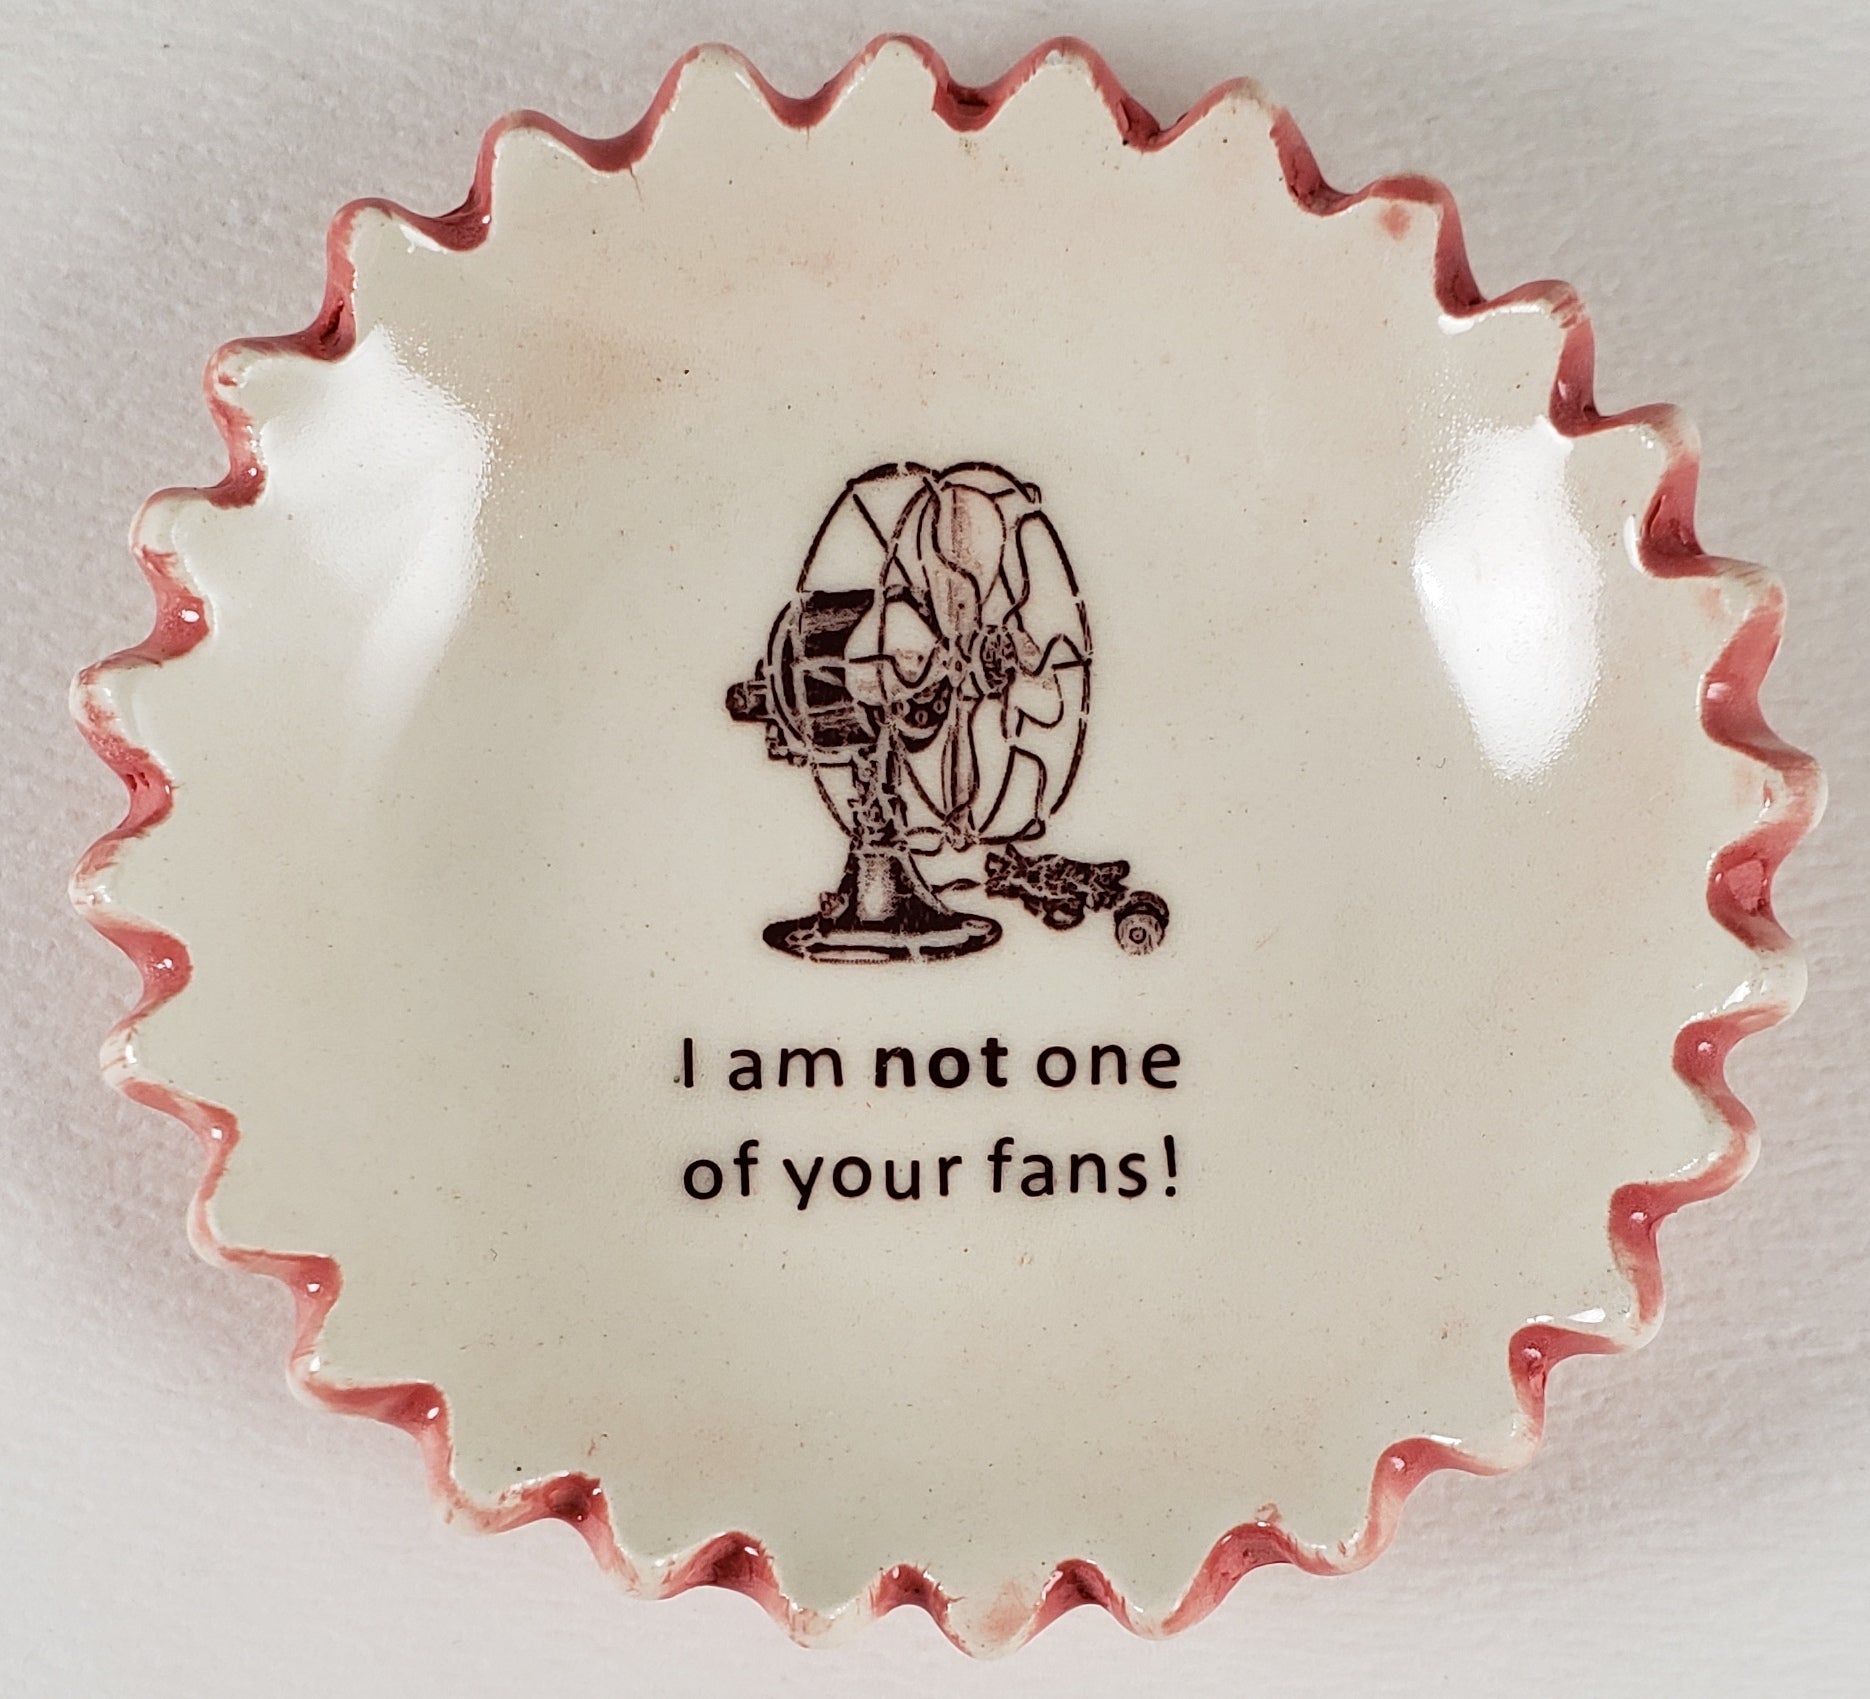 Tiny Plate with "I am not one of your fans!"